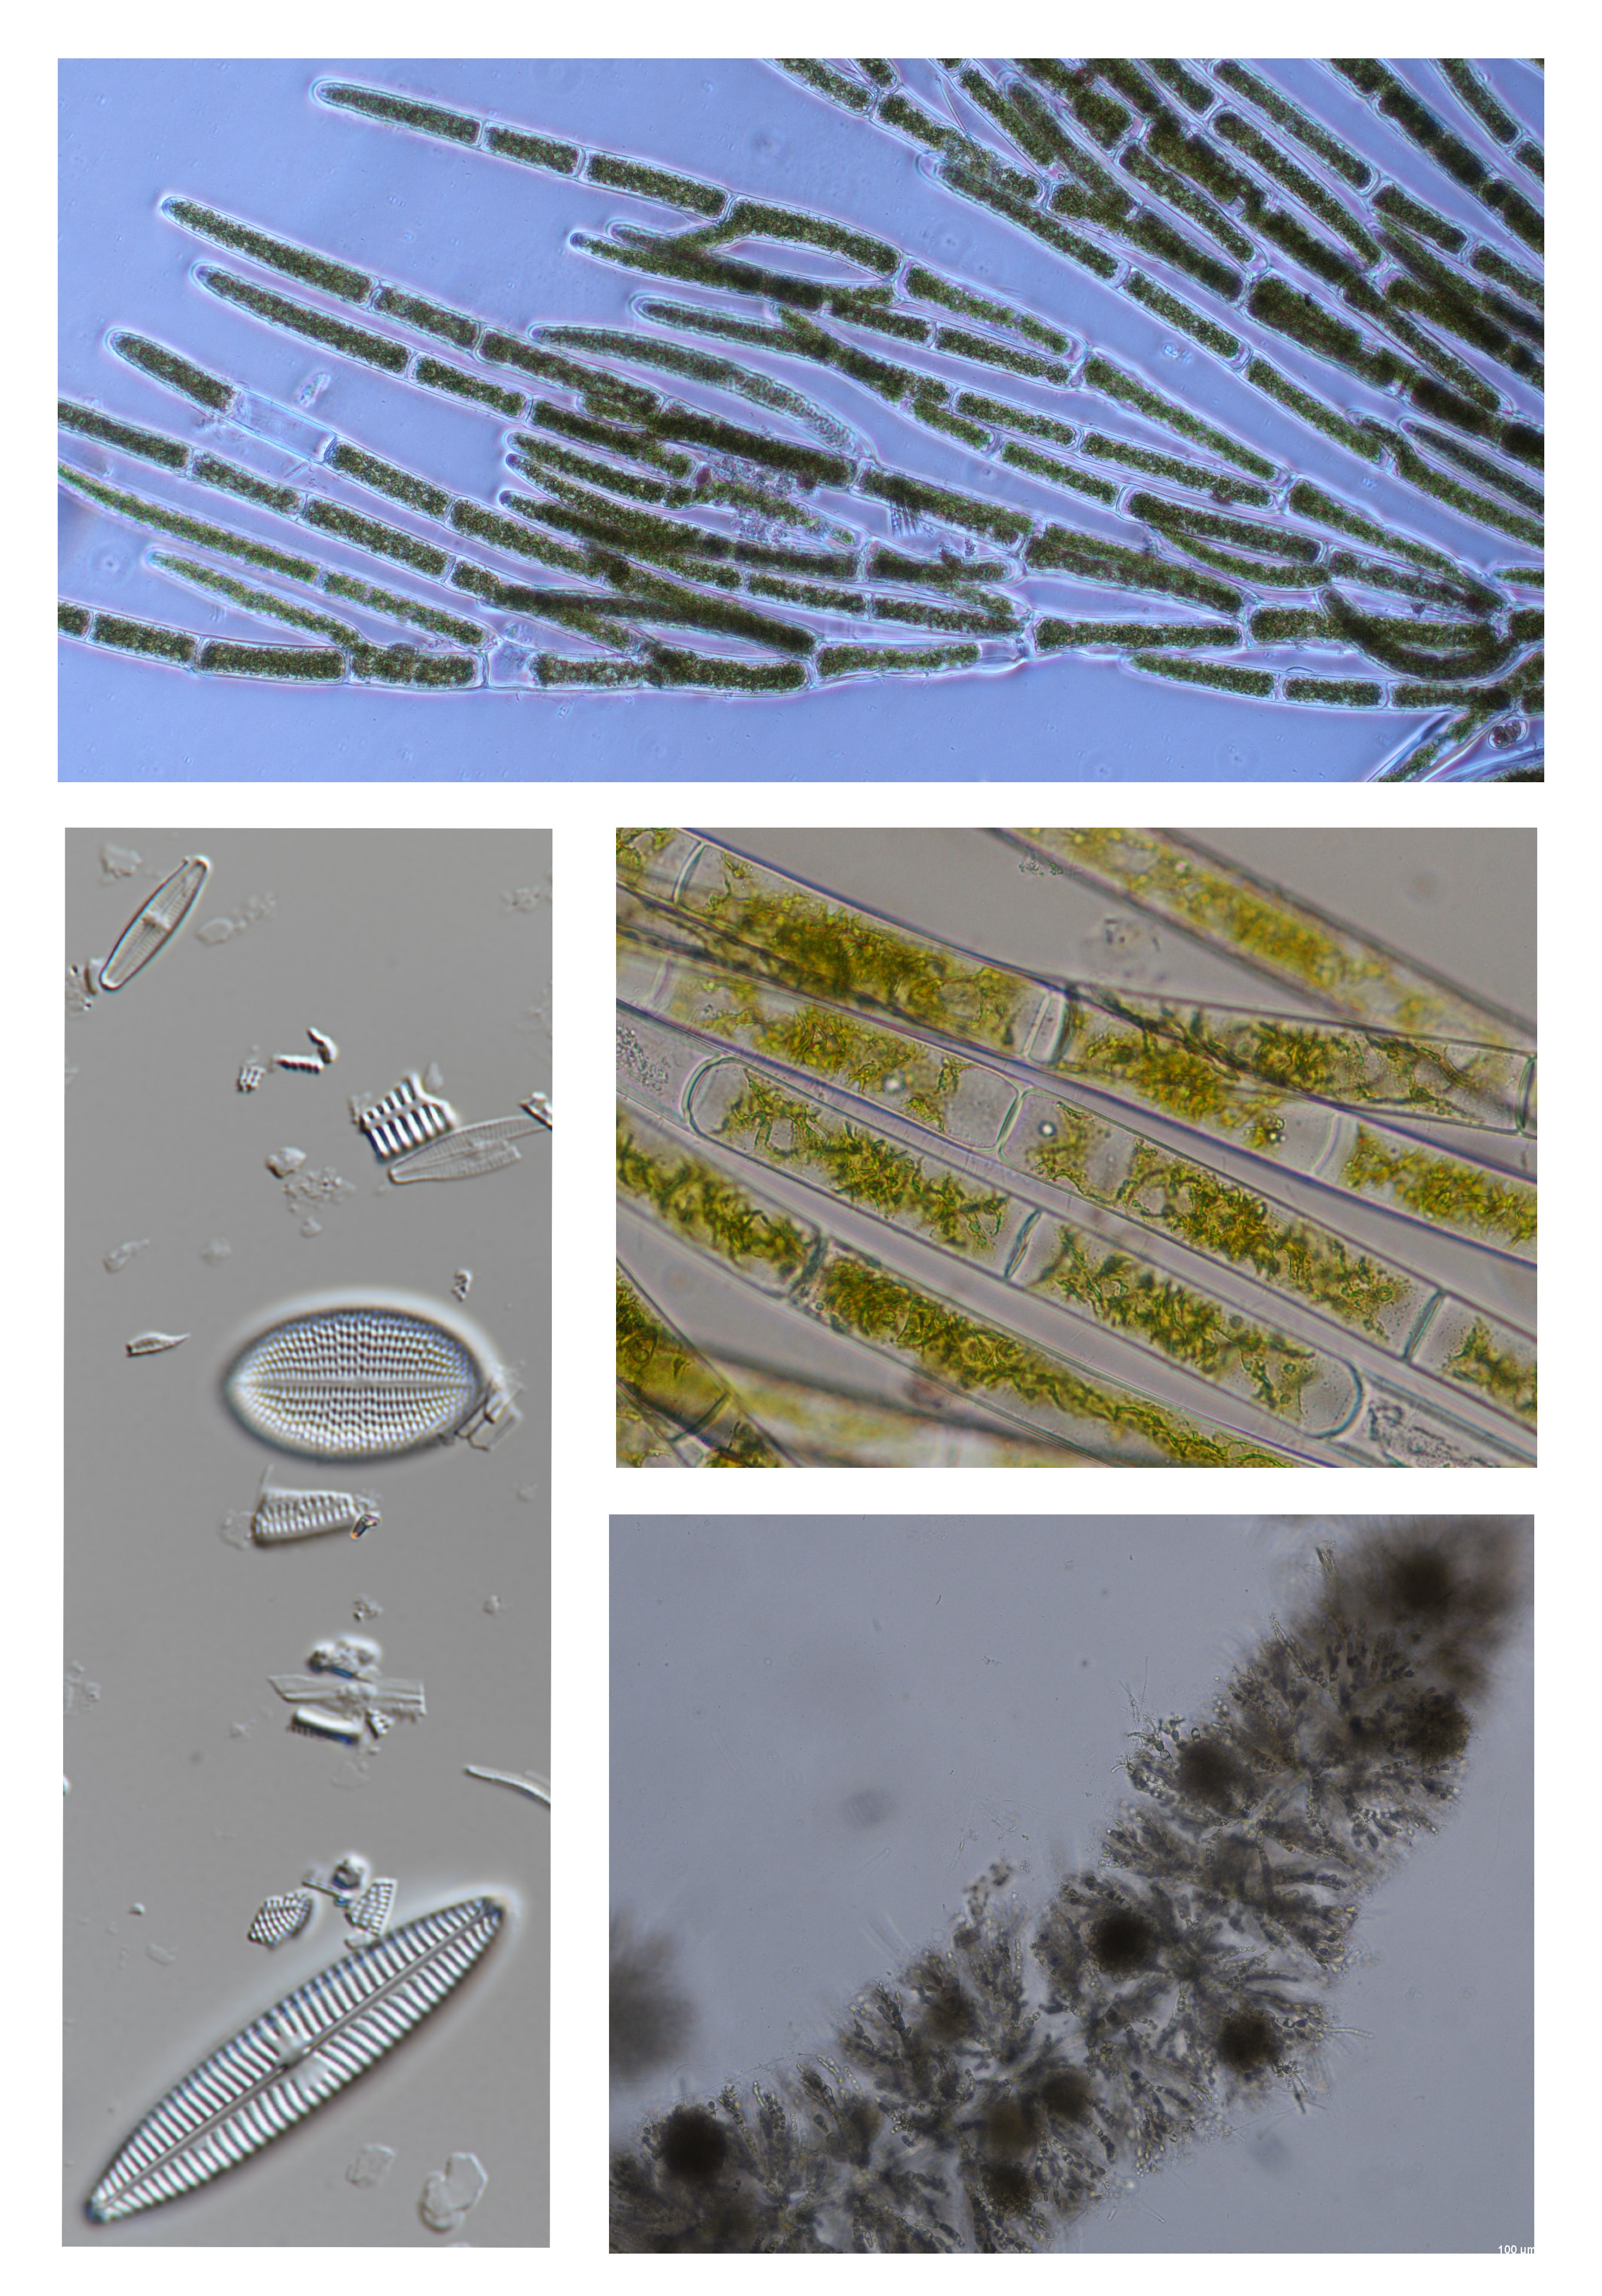 Common algae and diatom species that occur in the River Suir Photo: Bryan Kennedy